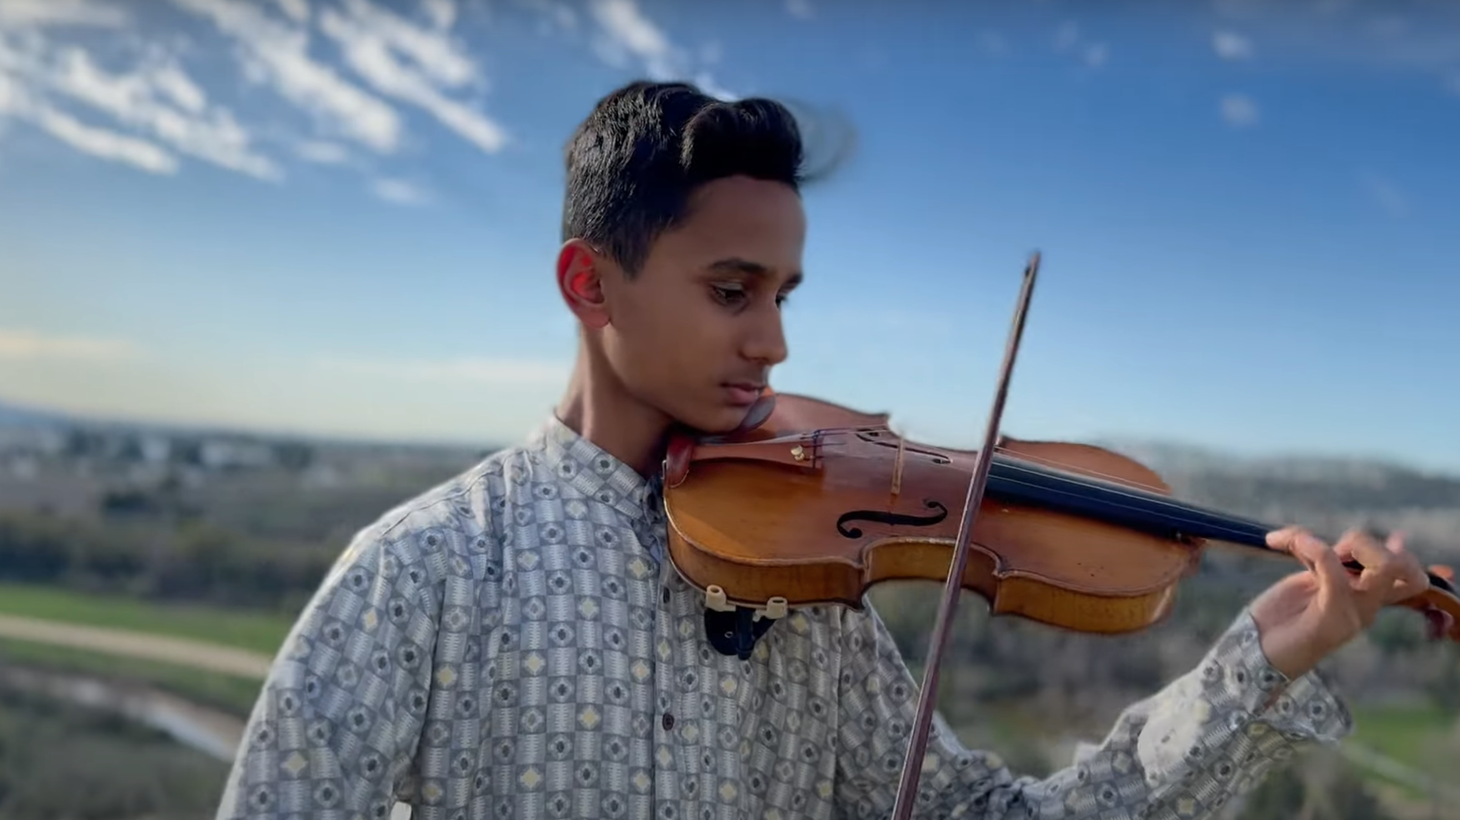 Meet Kaiden Surti, one of KCRW's featured artists for the Young Creators Project.